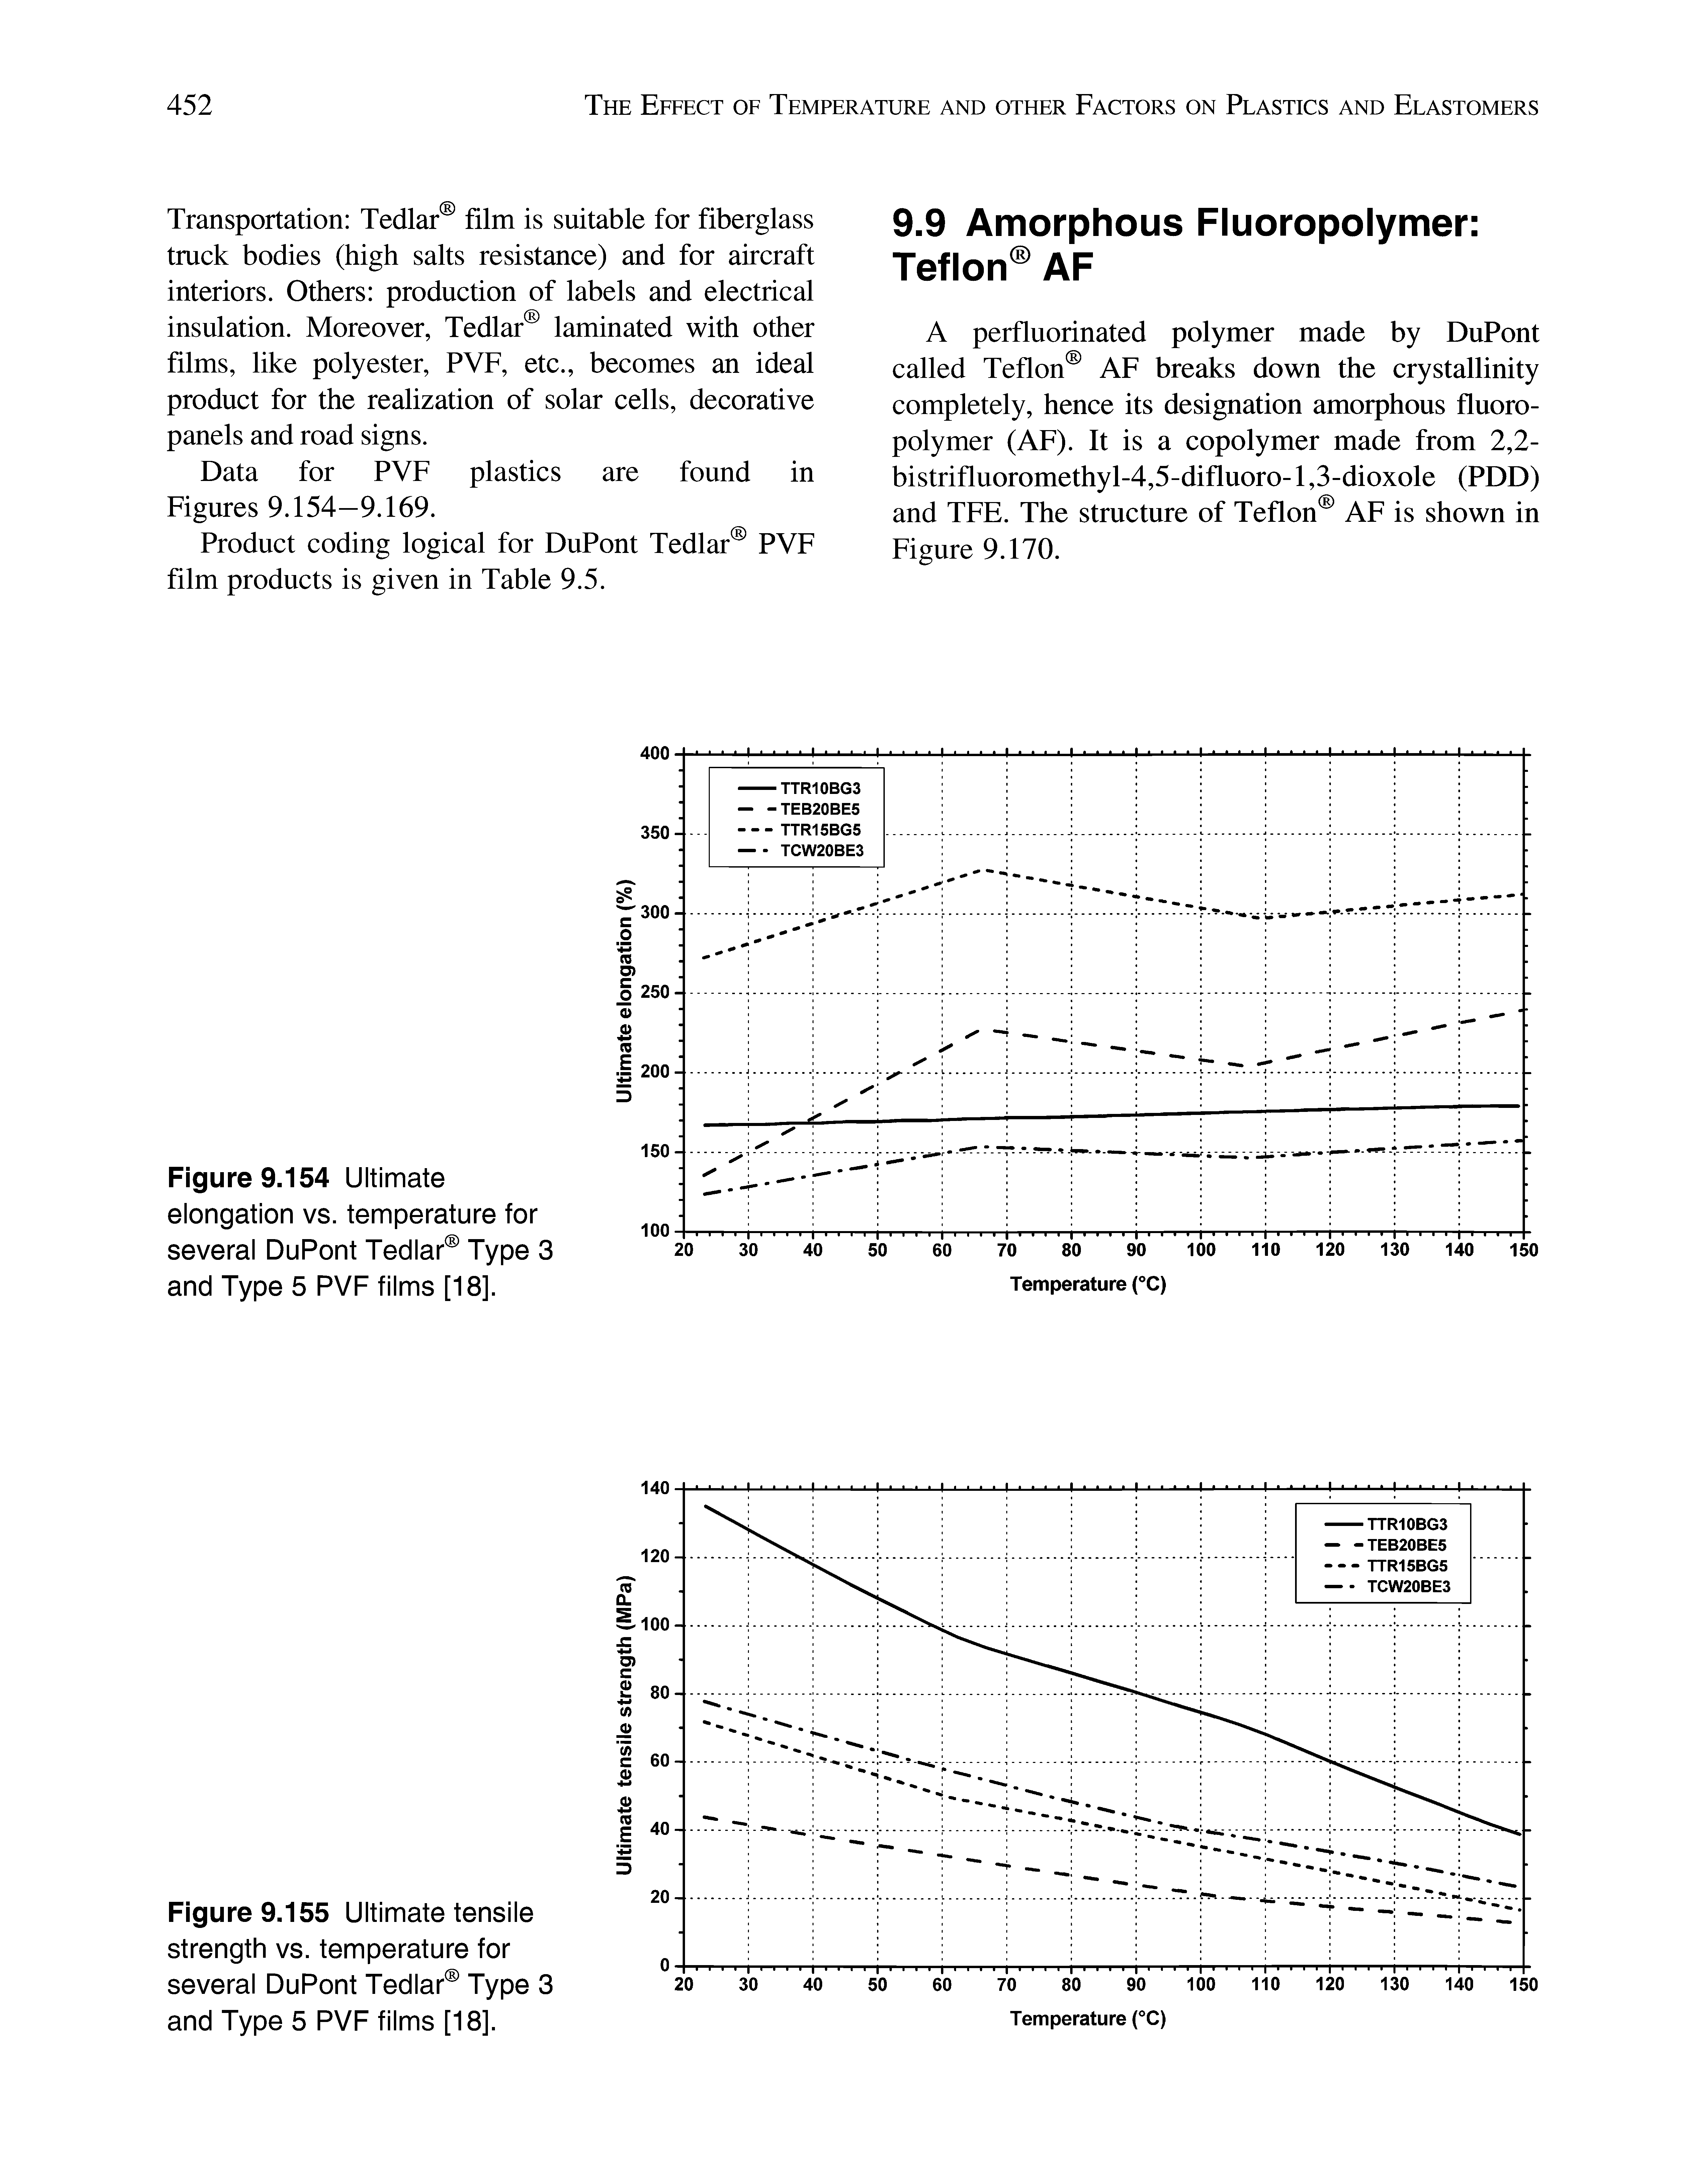 Figure 9.154 Ultimate elongation vs. temperature for several DuPont Tedlar Type 3 and Type 5 PVF films [18].